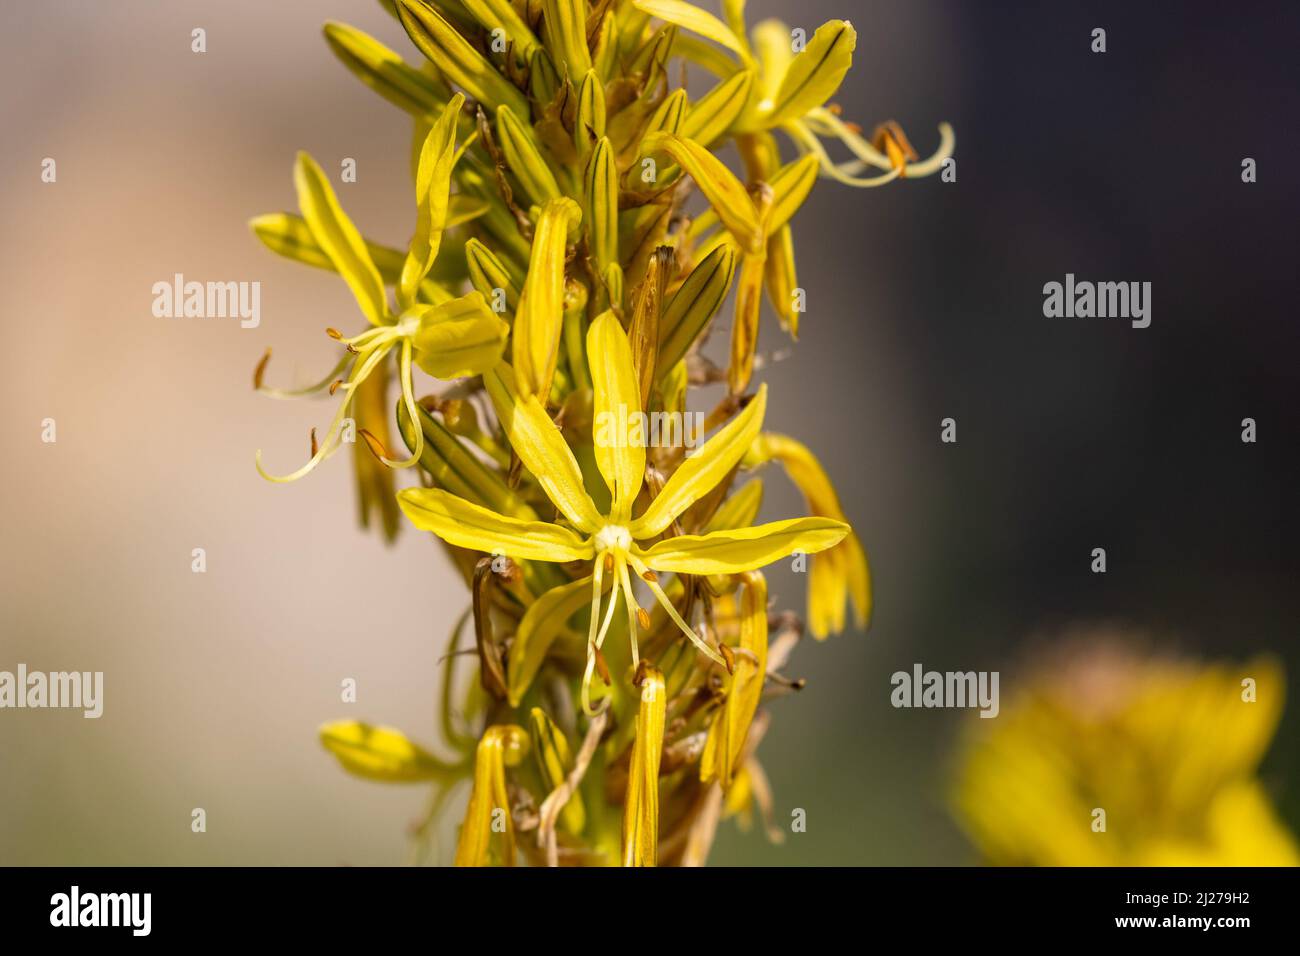 Flowers of Asphodeline lutea commonly called king's spear Stock Photo